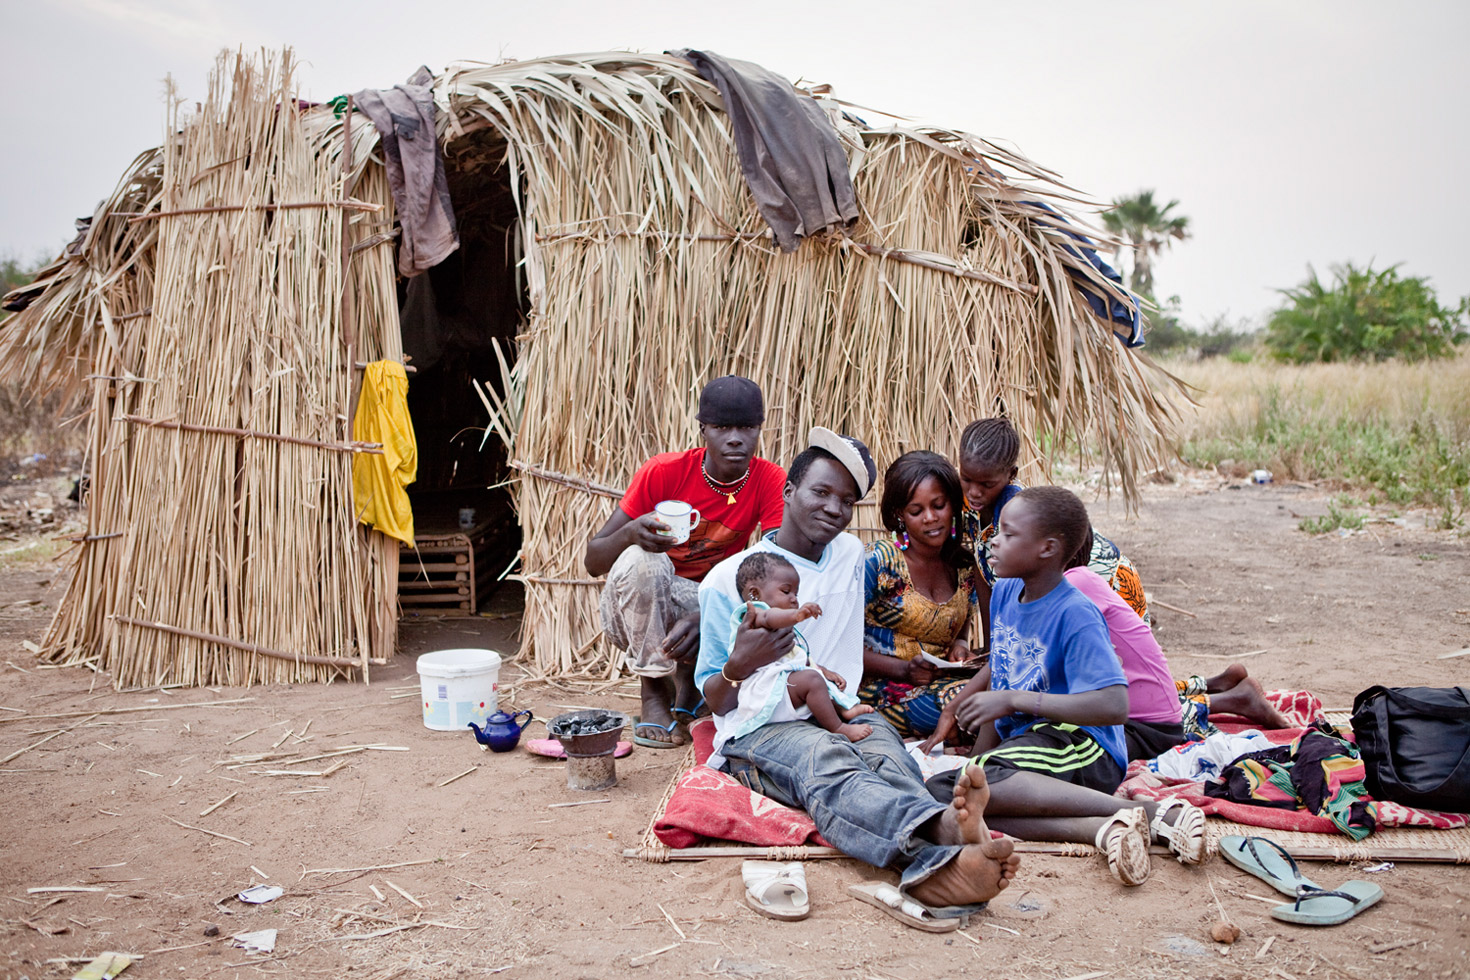 A migrant fisherman from Senegal with his family outside their seasonal fishing hut at Carrol's Wharf, The Gambia.